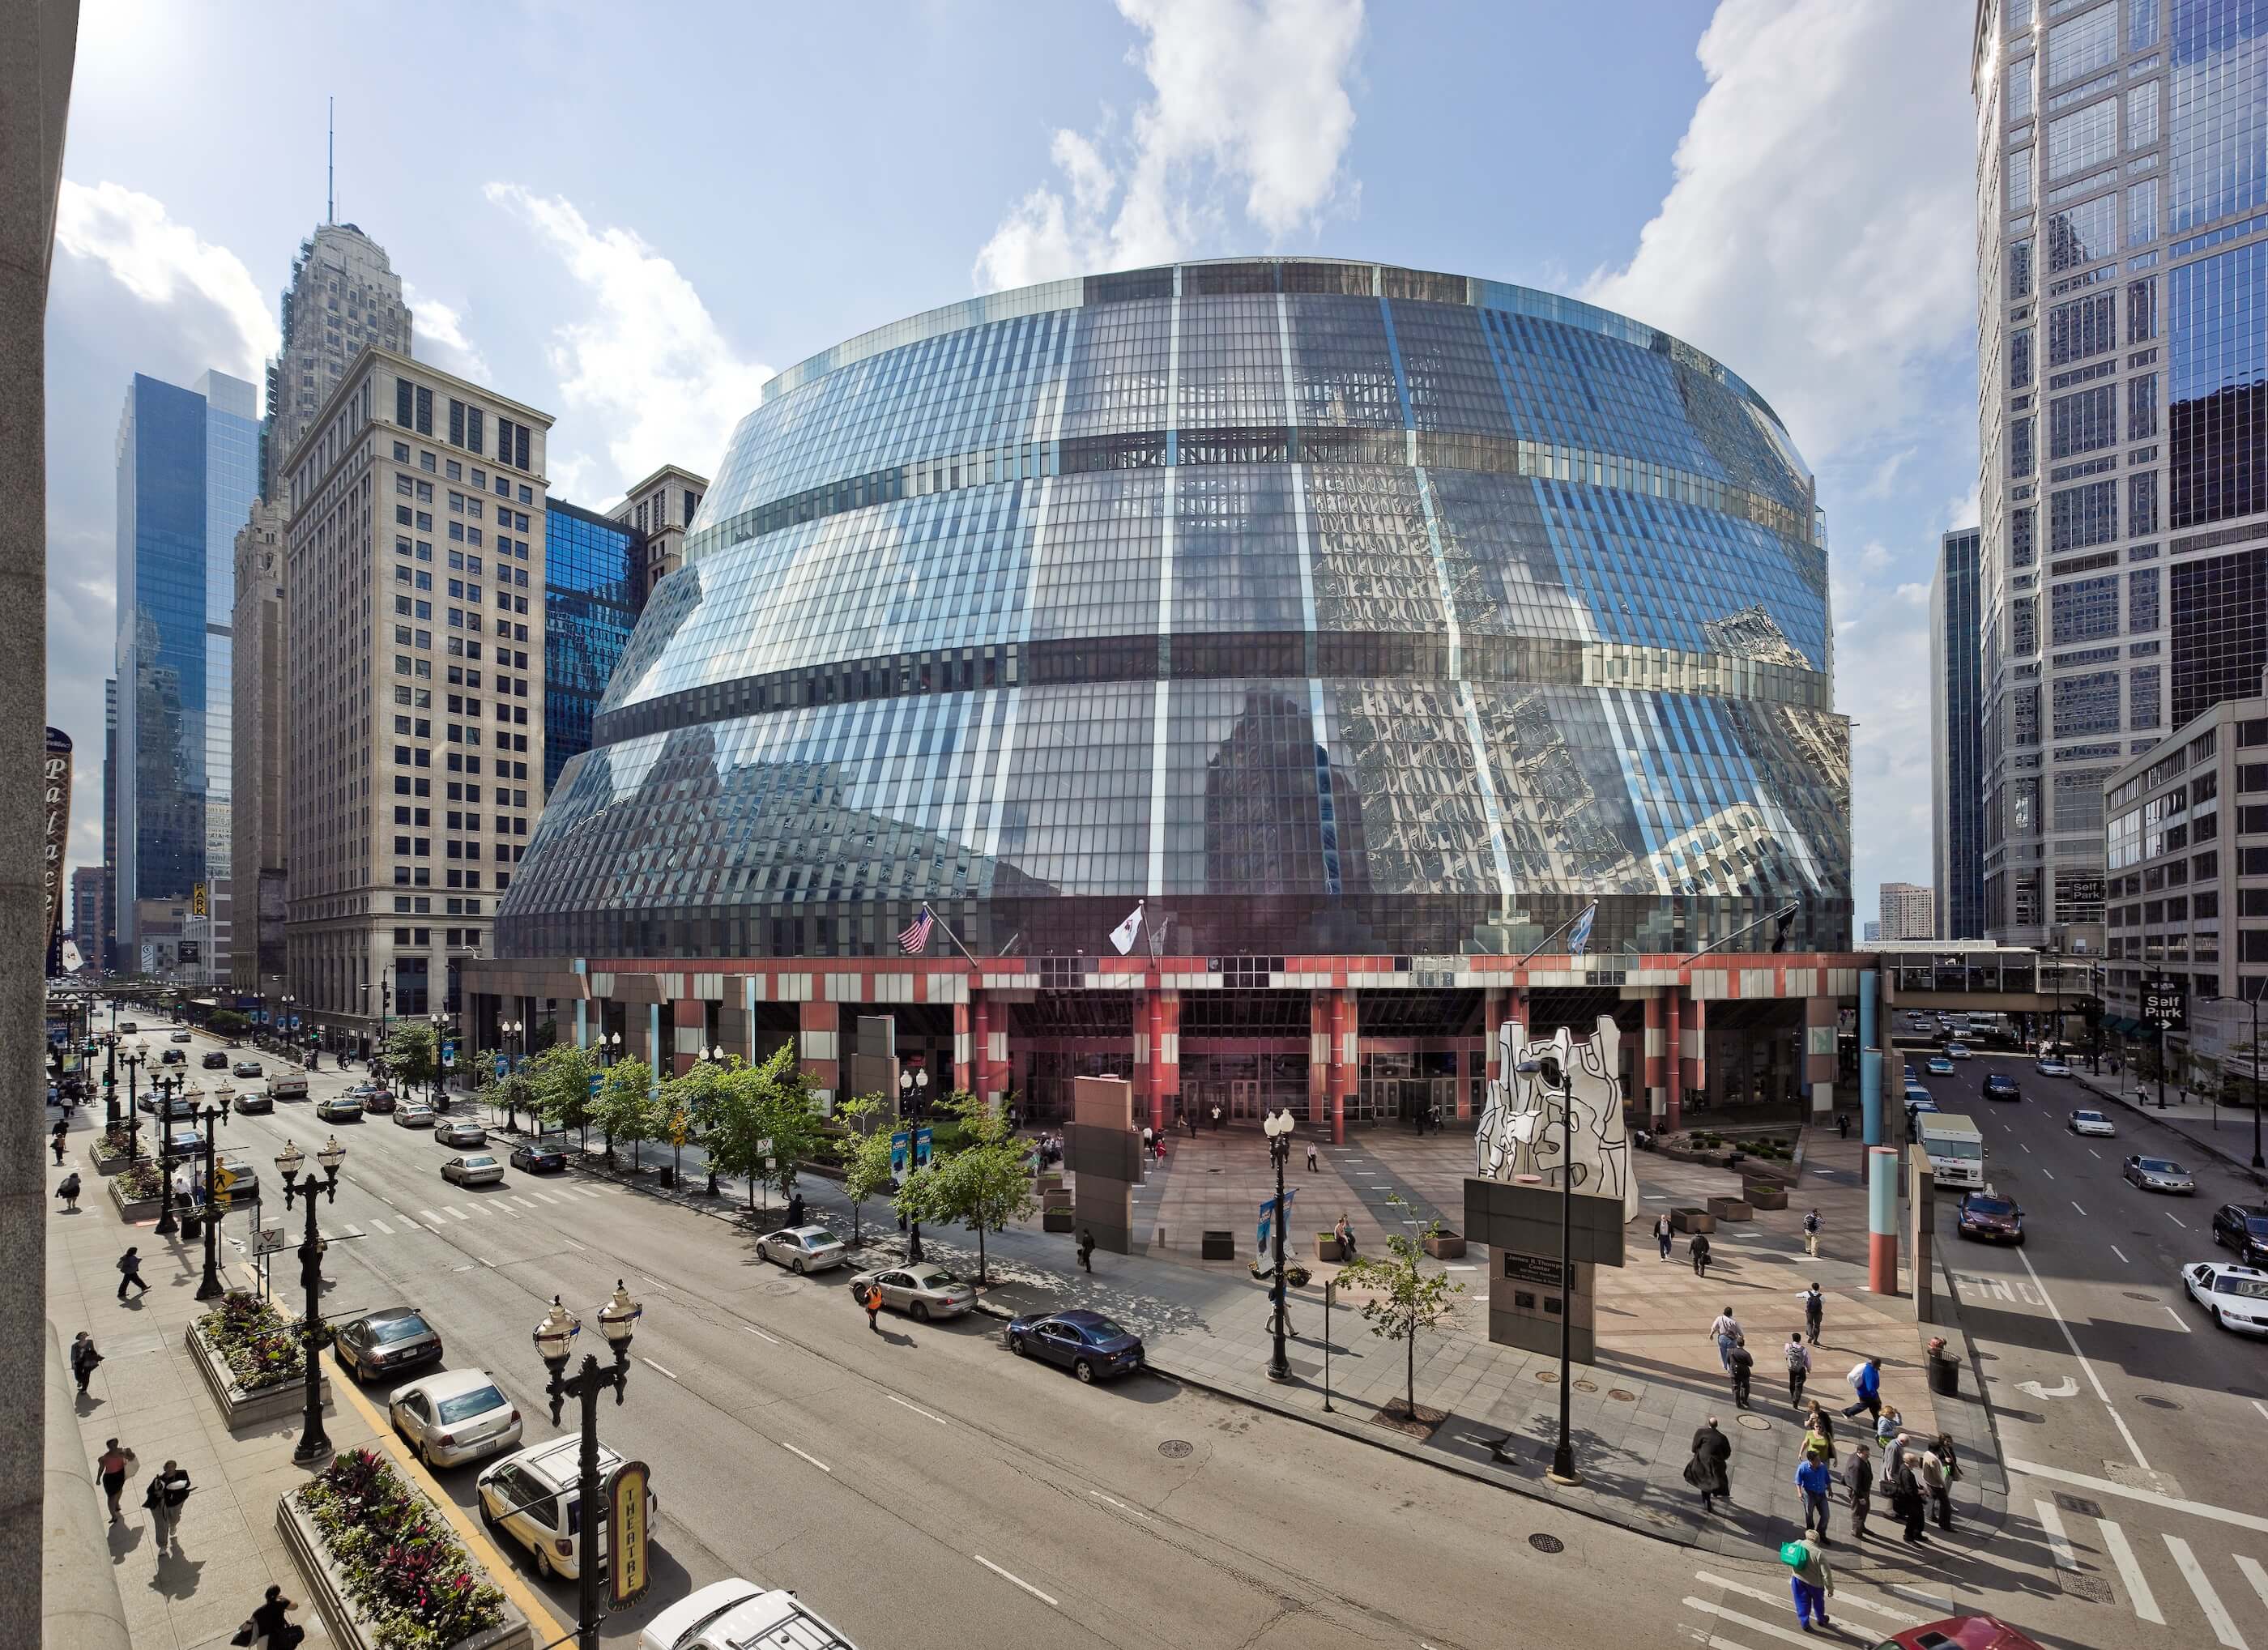 exterior view of a futuristic glass building in a city, the thompson center